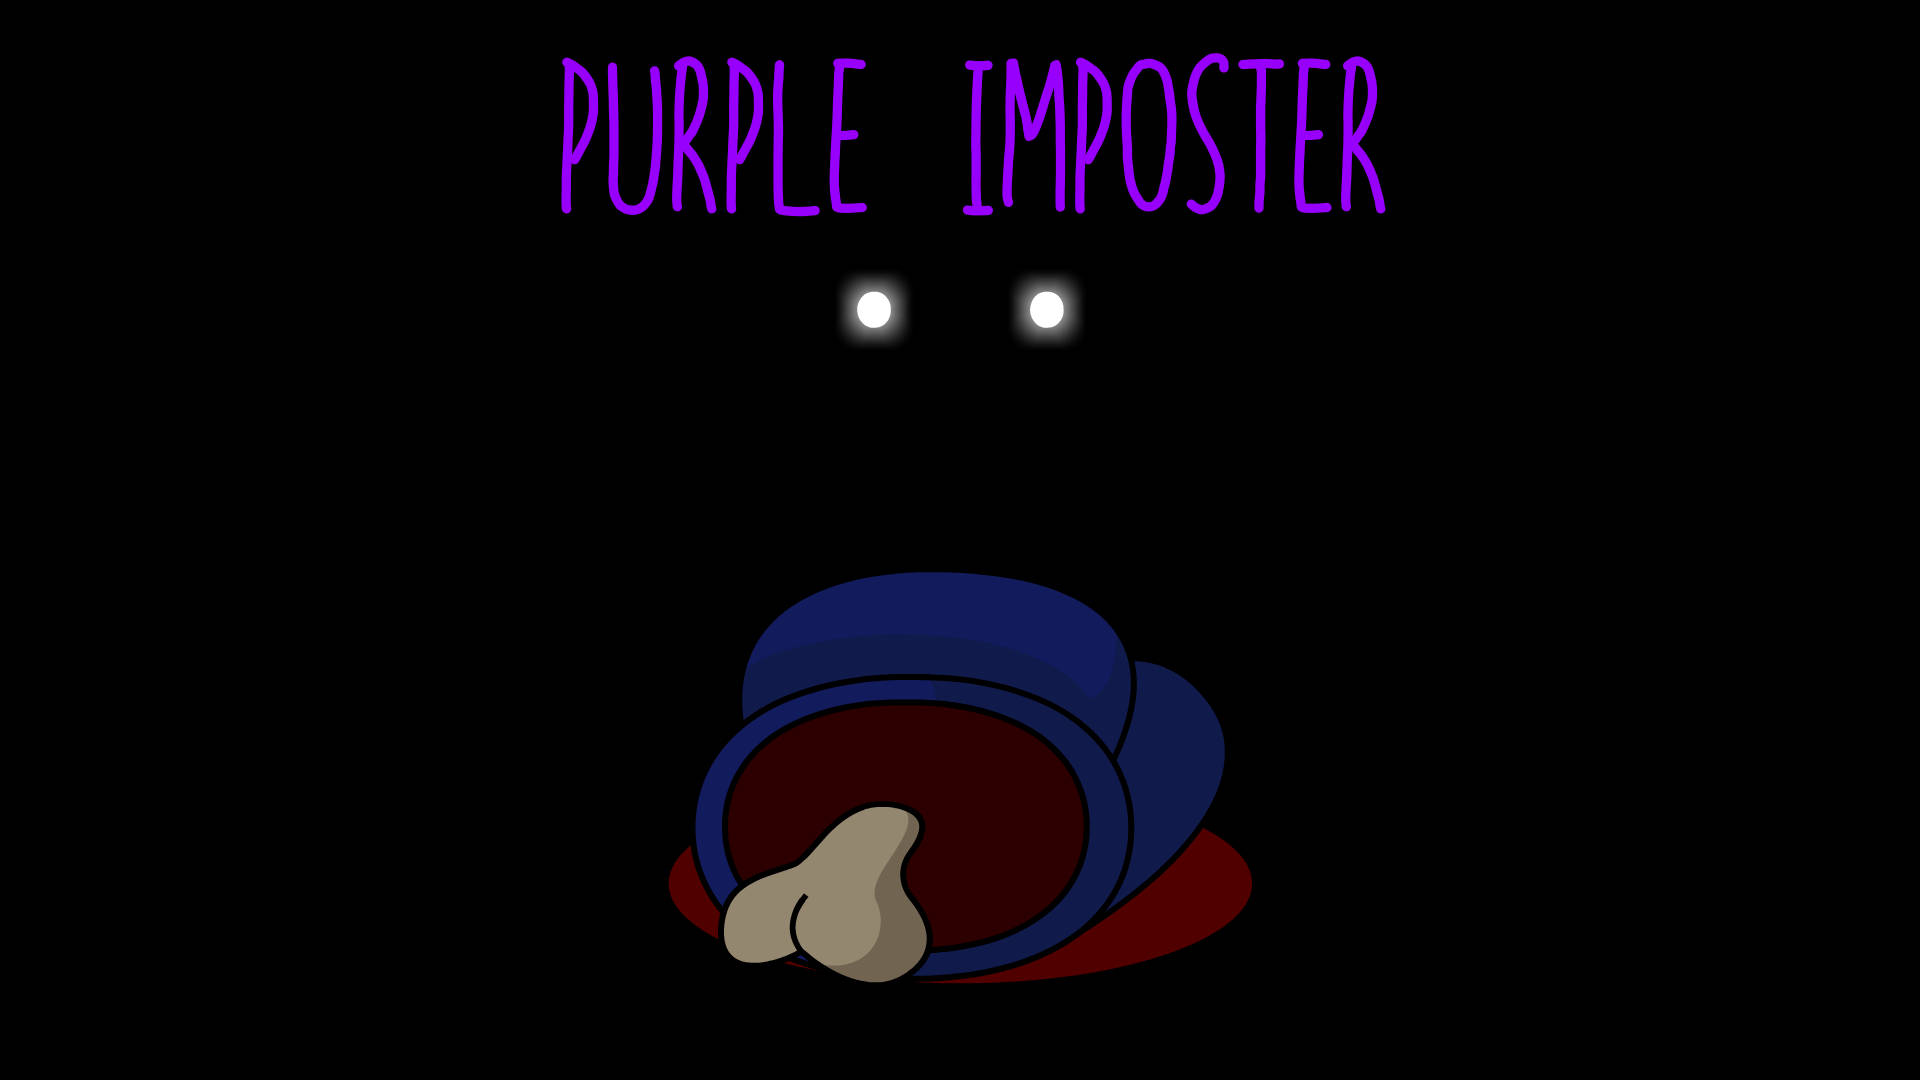 Purple Crewmate Among Us Imposter